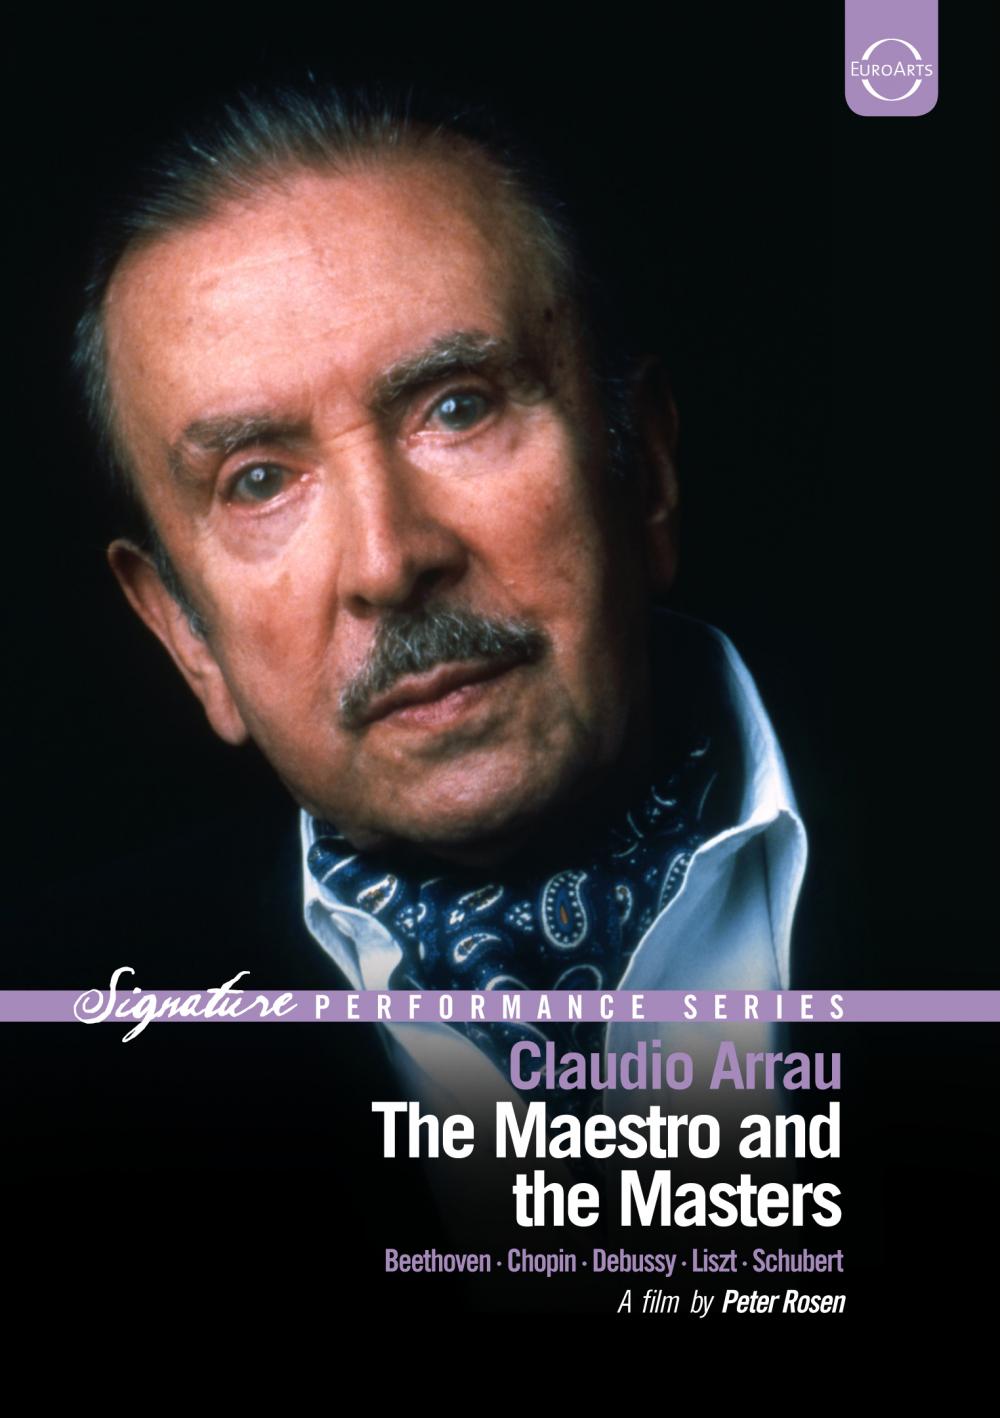 ARRAU: The Maestro and the Masters - BEETHOVEN, SCHUBERT, DEBUSSY, CHOPIN, LISZT (DVD)